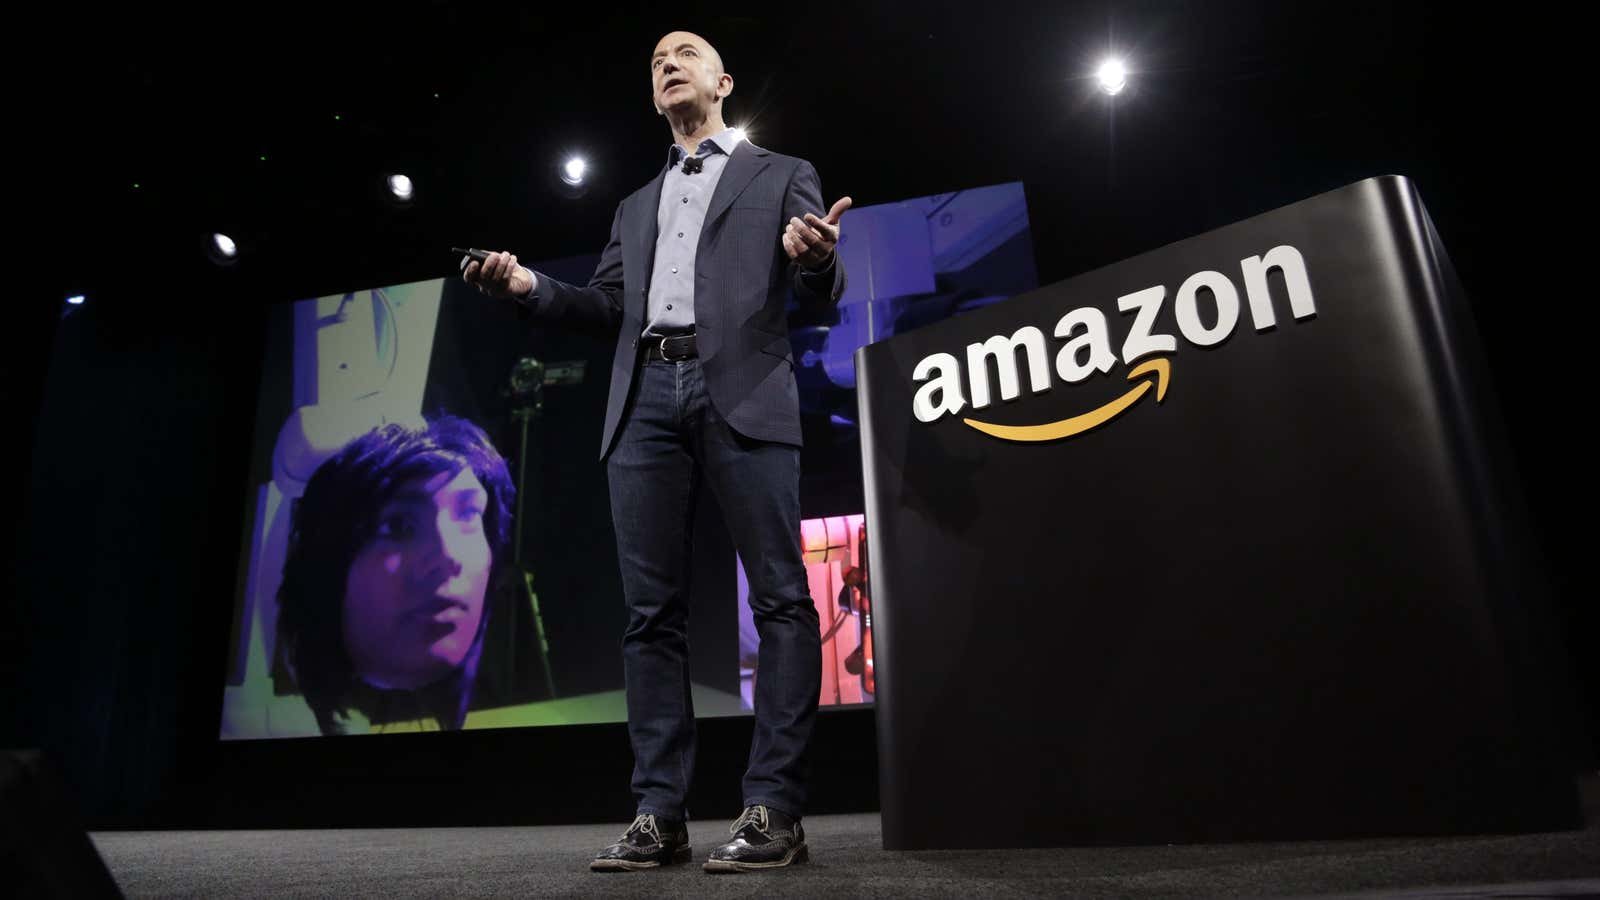 Amazon CEO Jeff Bezos discusses his company’s new Fire smartphone at a news conference in Seattle, Washington June 18, 2014. Bezos unveiled a $200 smartphone…